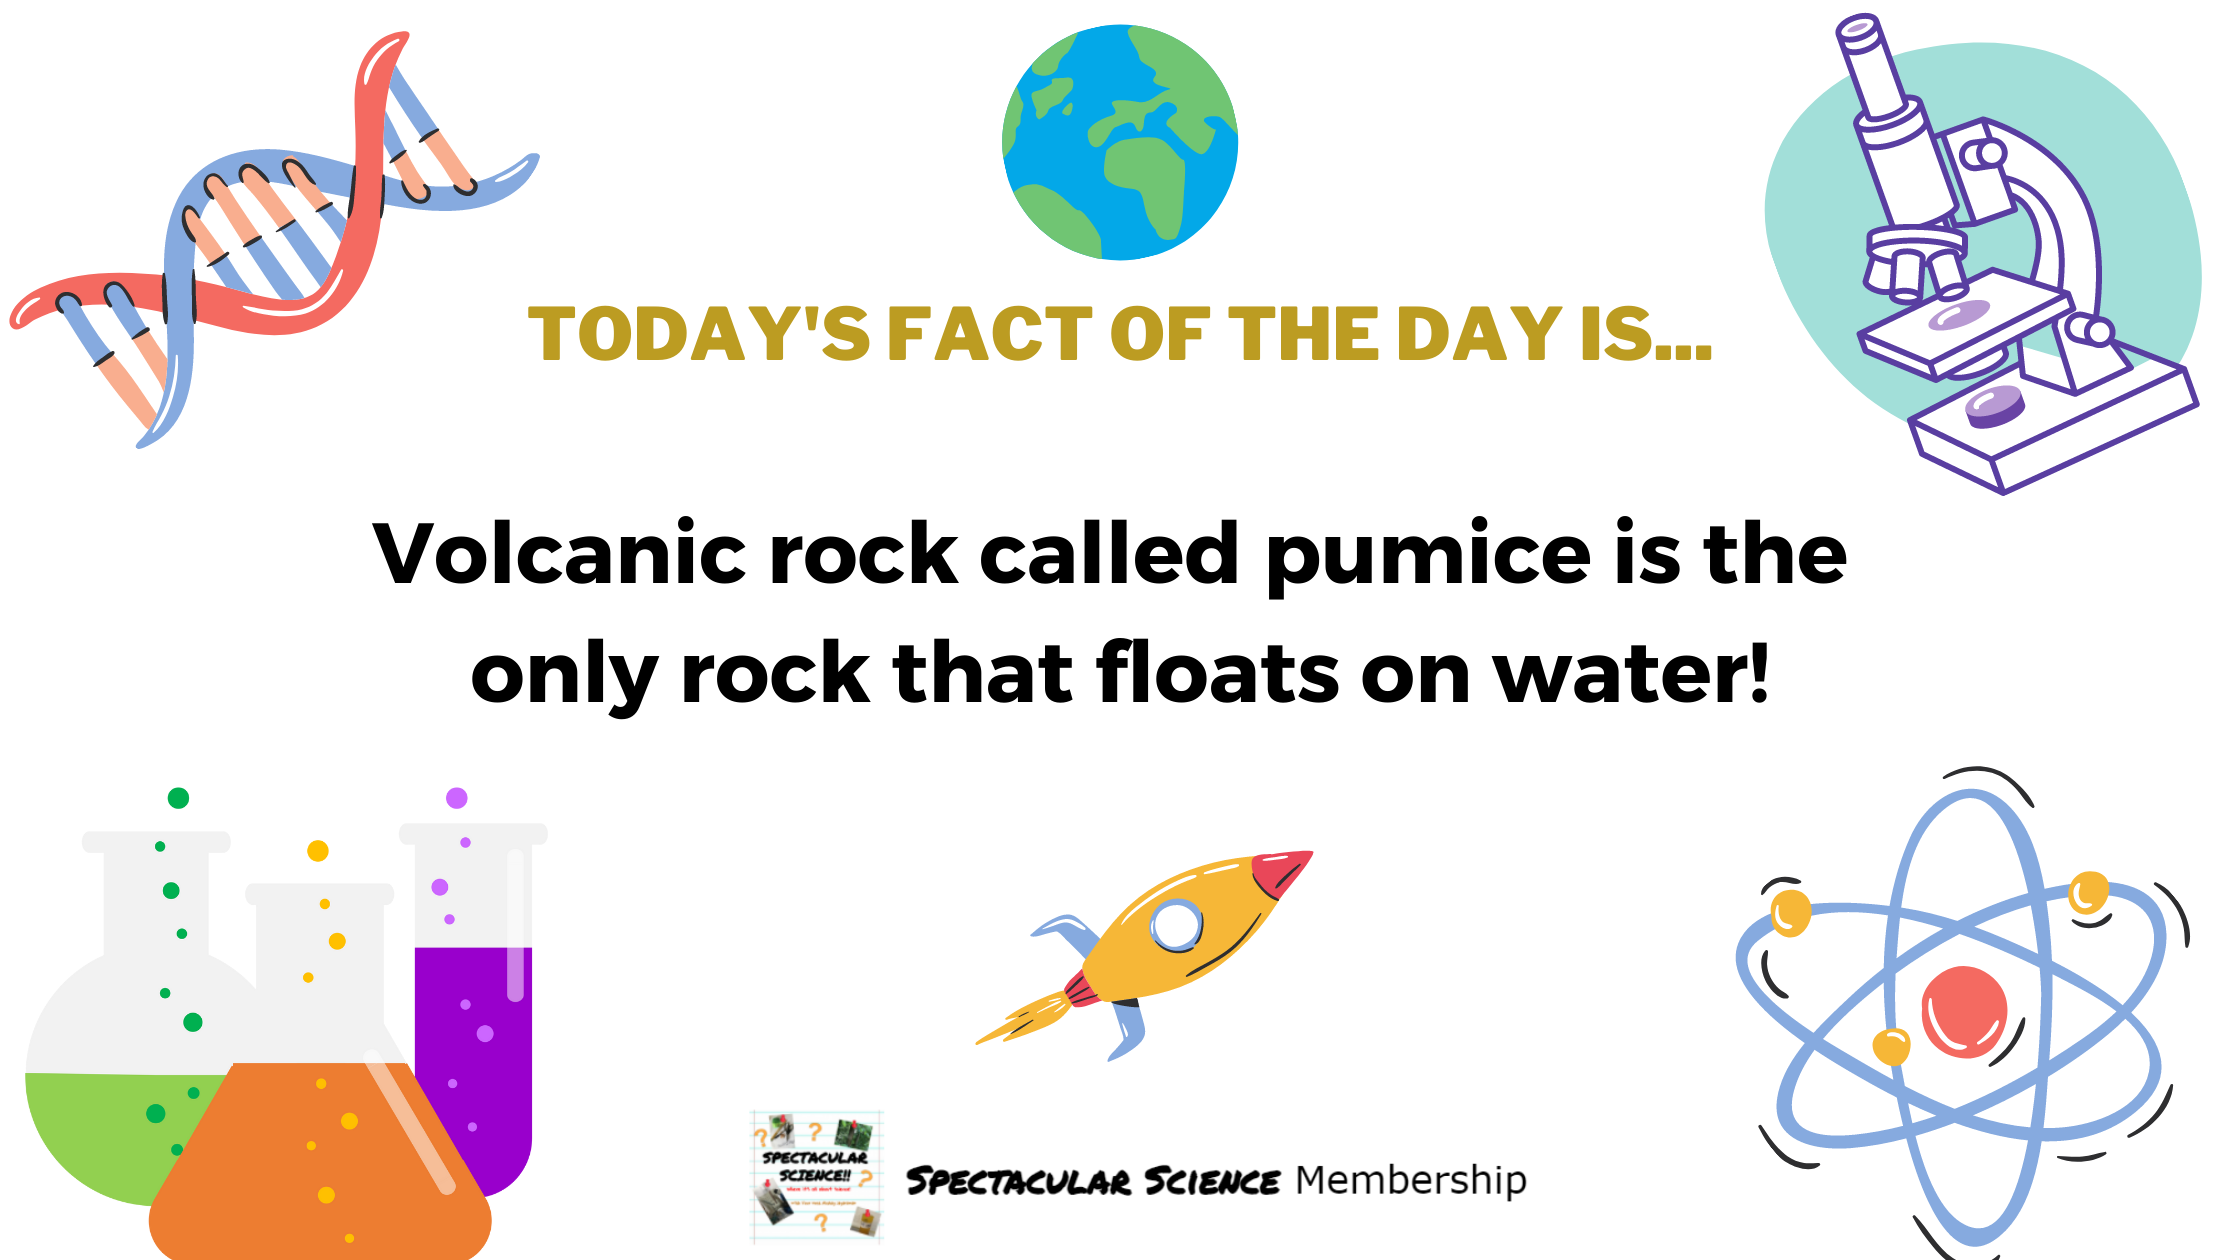 Fact of the Day Image Jan. 26th